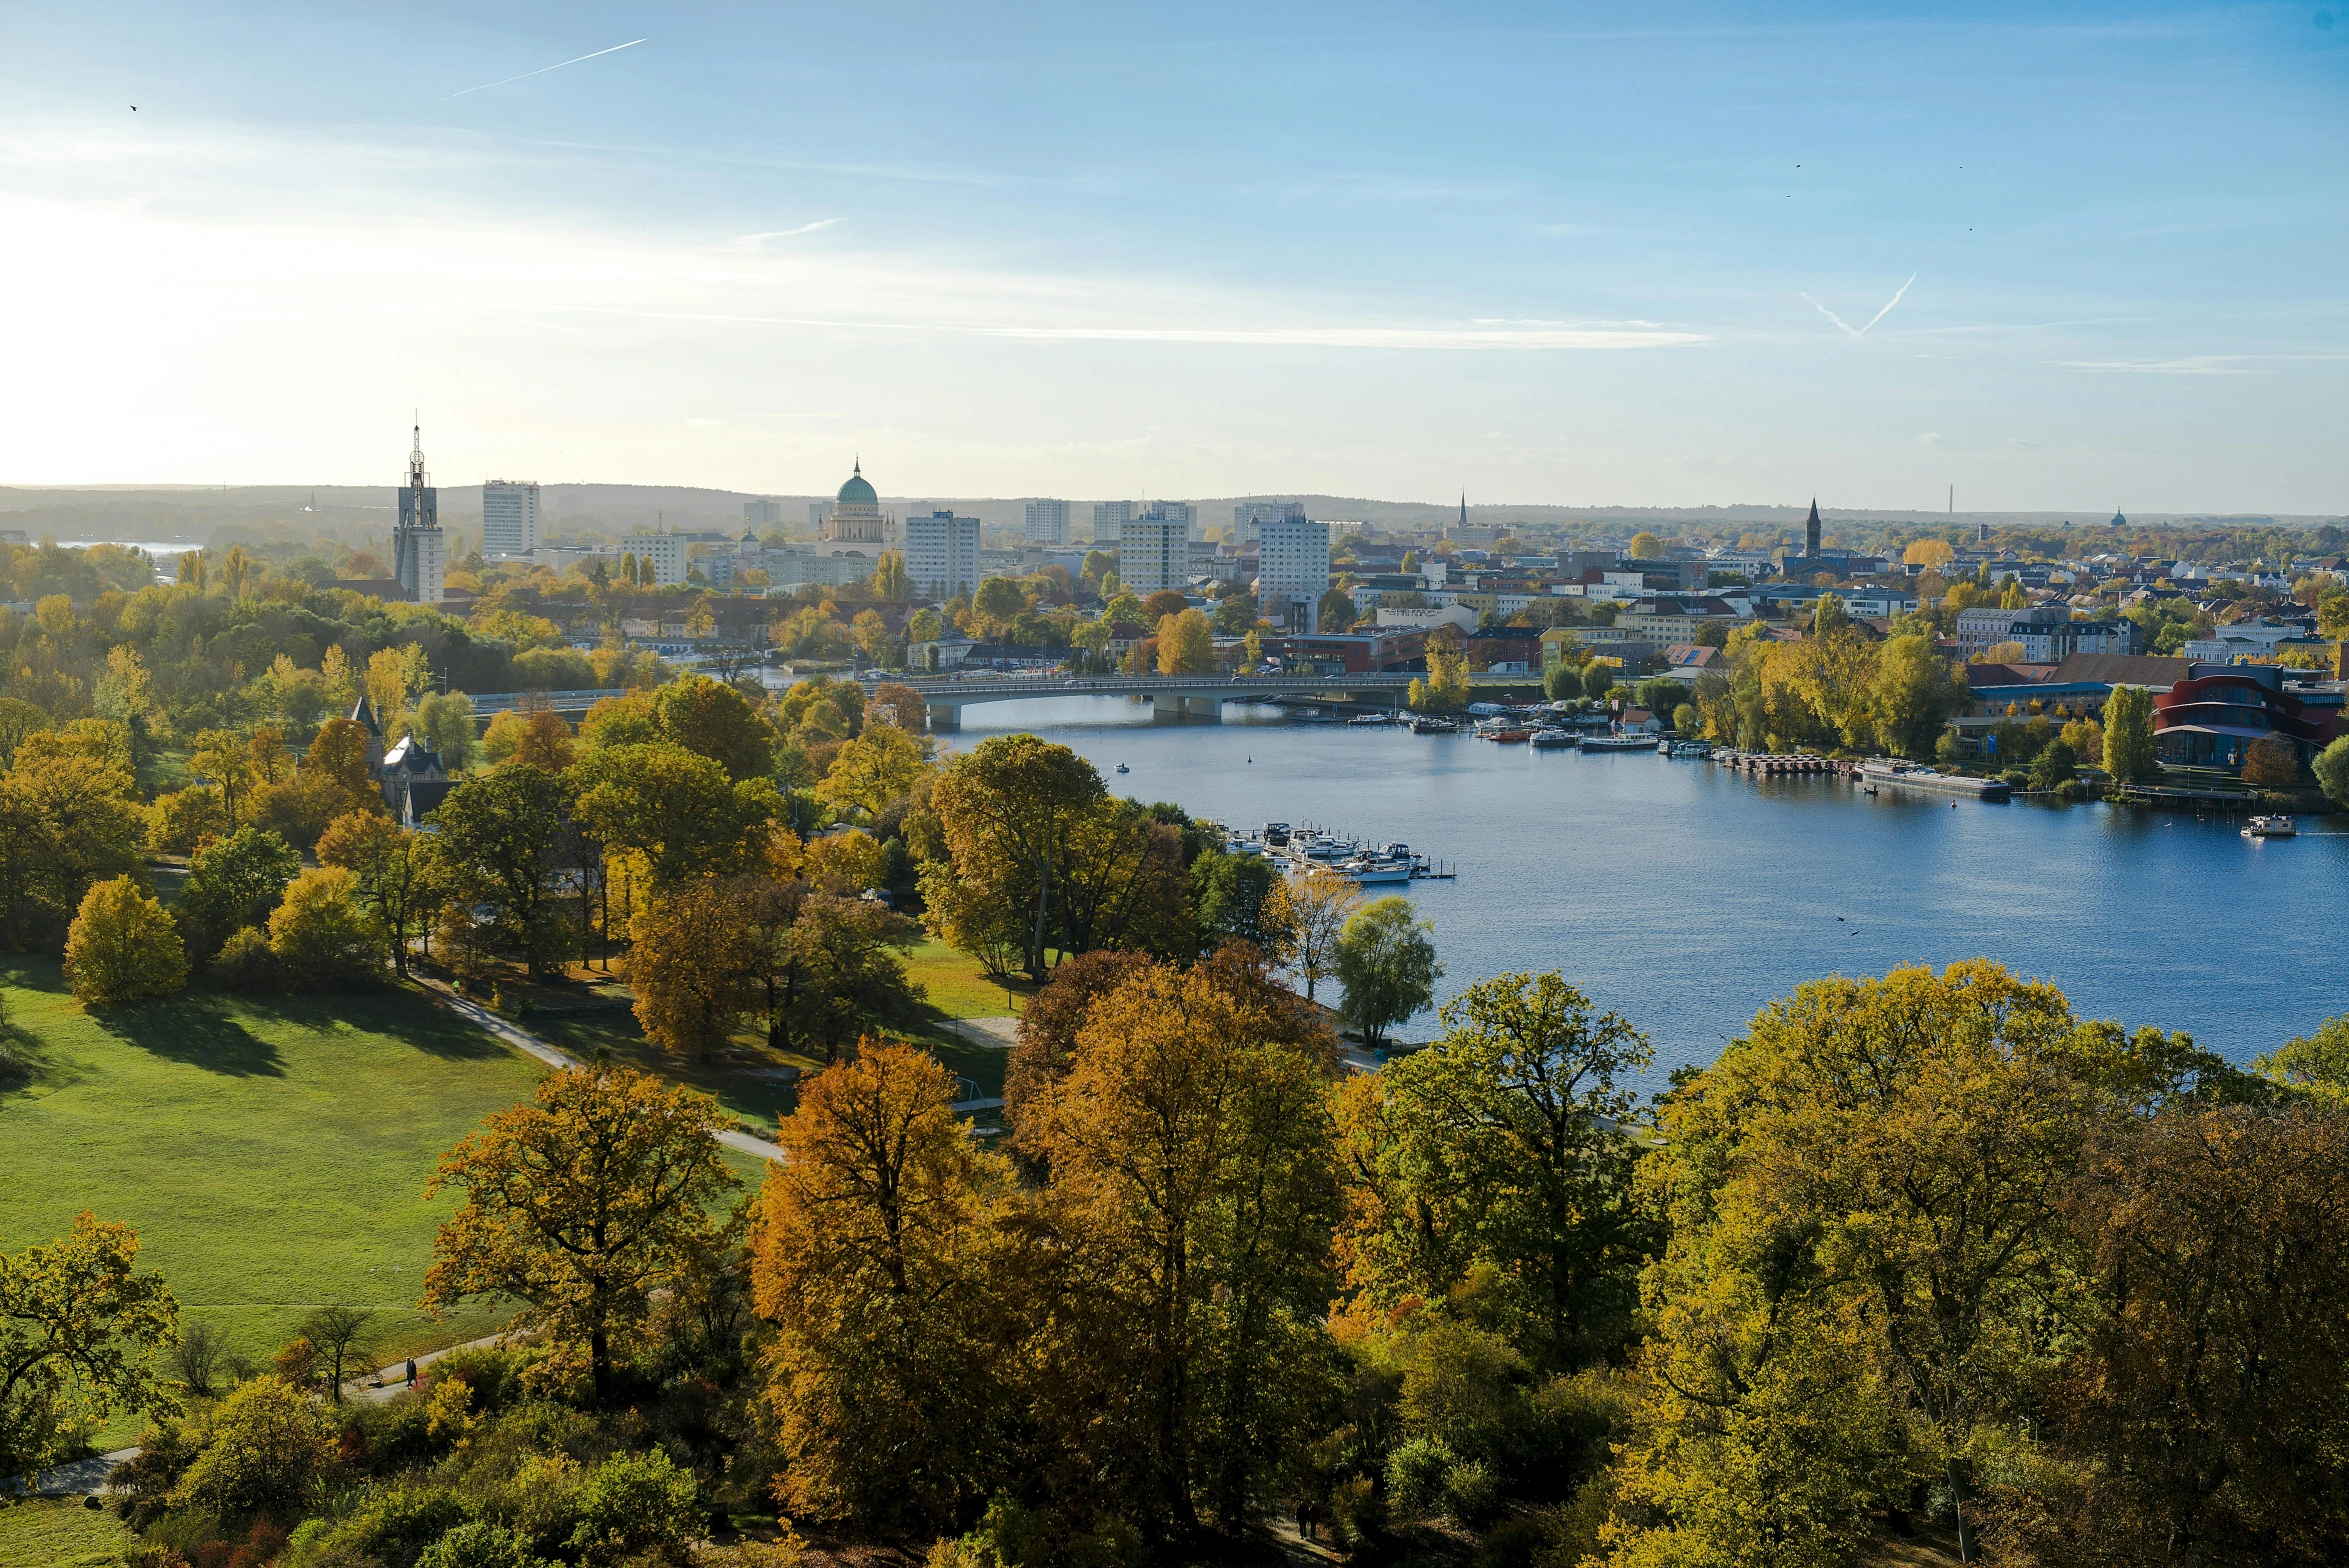 a large body of water surrounded by trees, visual art, stockholm city, parks and monuments, expansive view, slide show